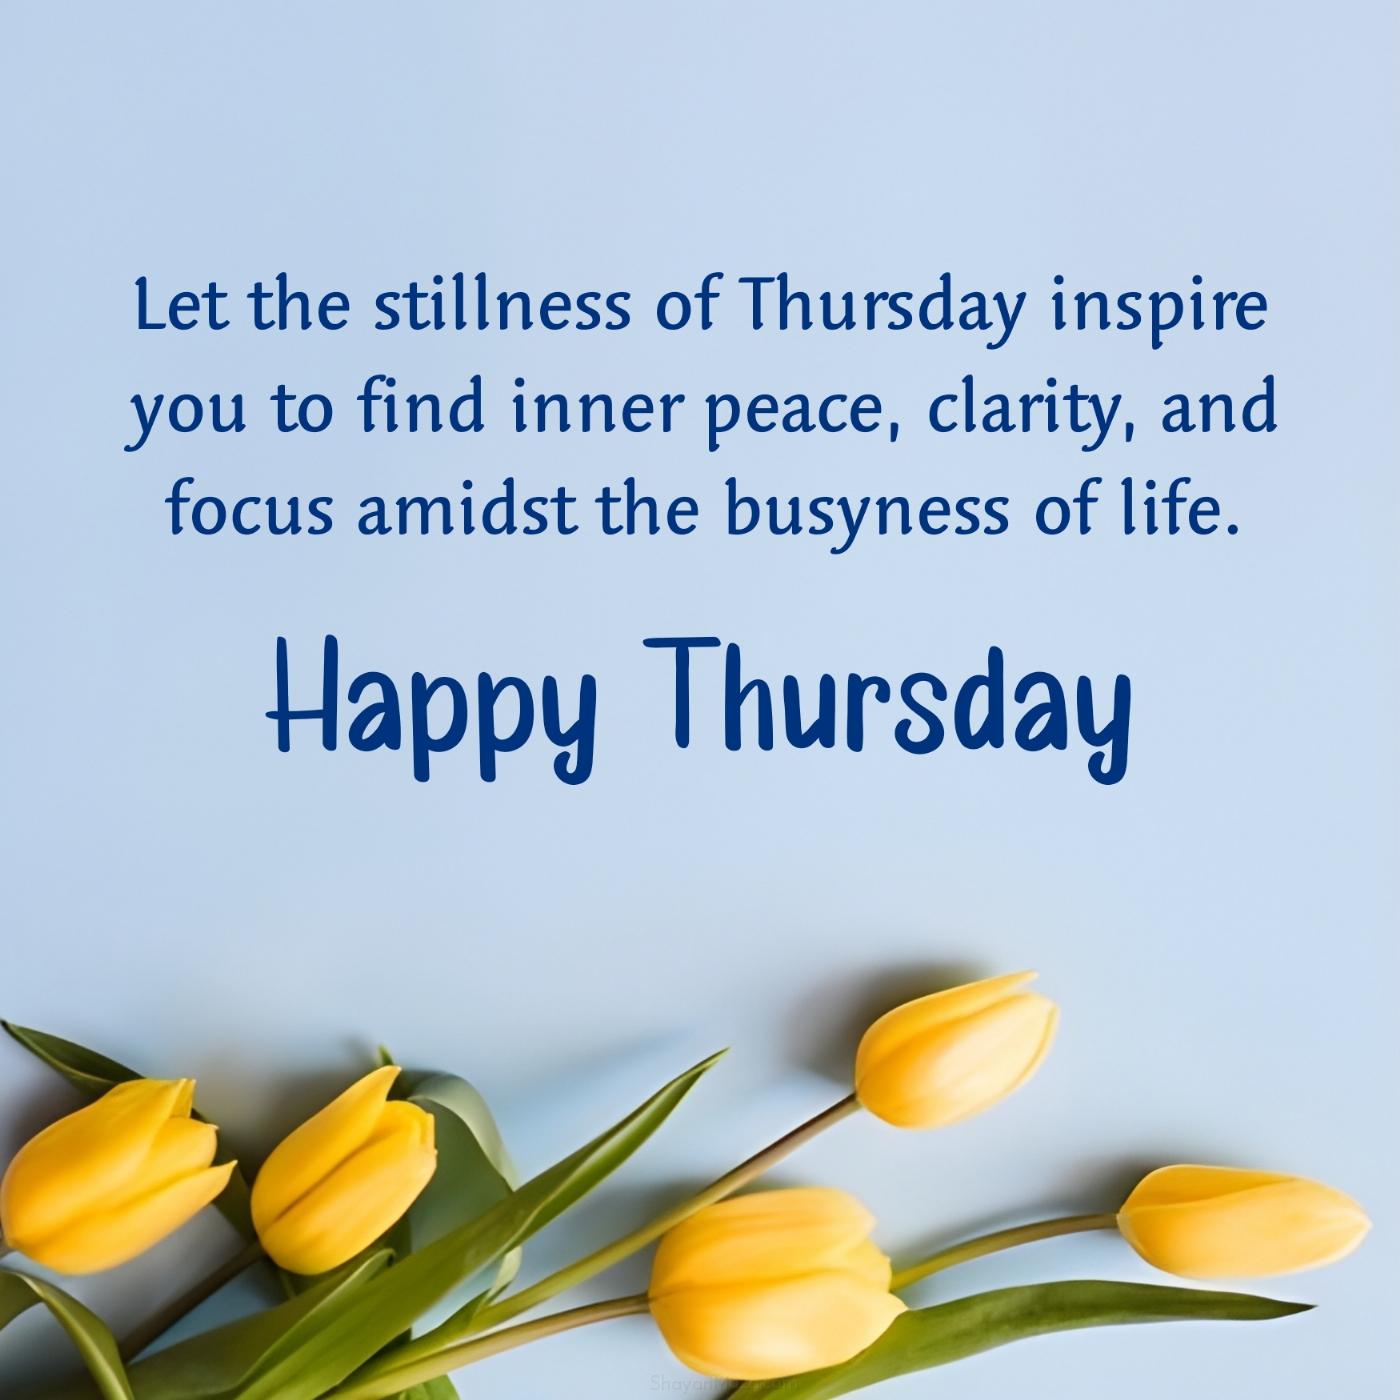 Let the stillness of Thursday inspire you to find inner peace